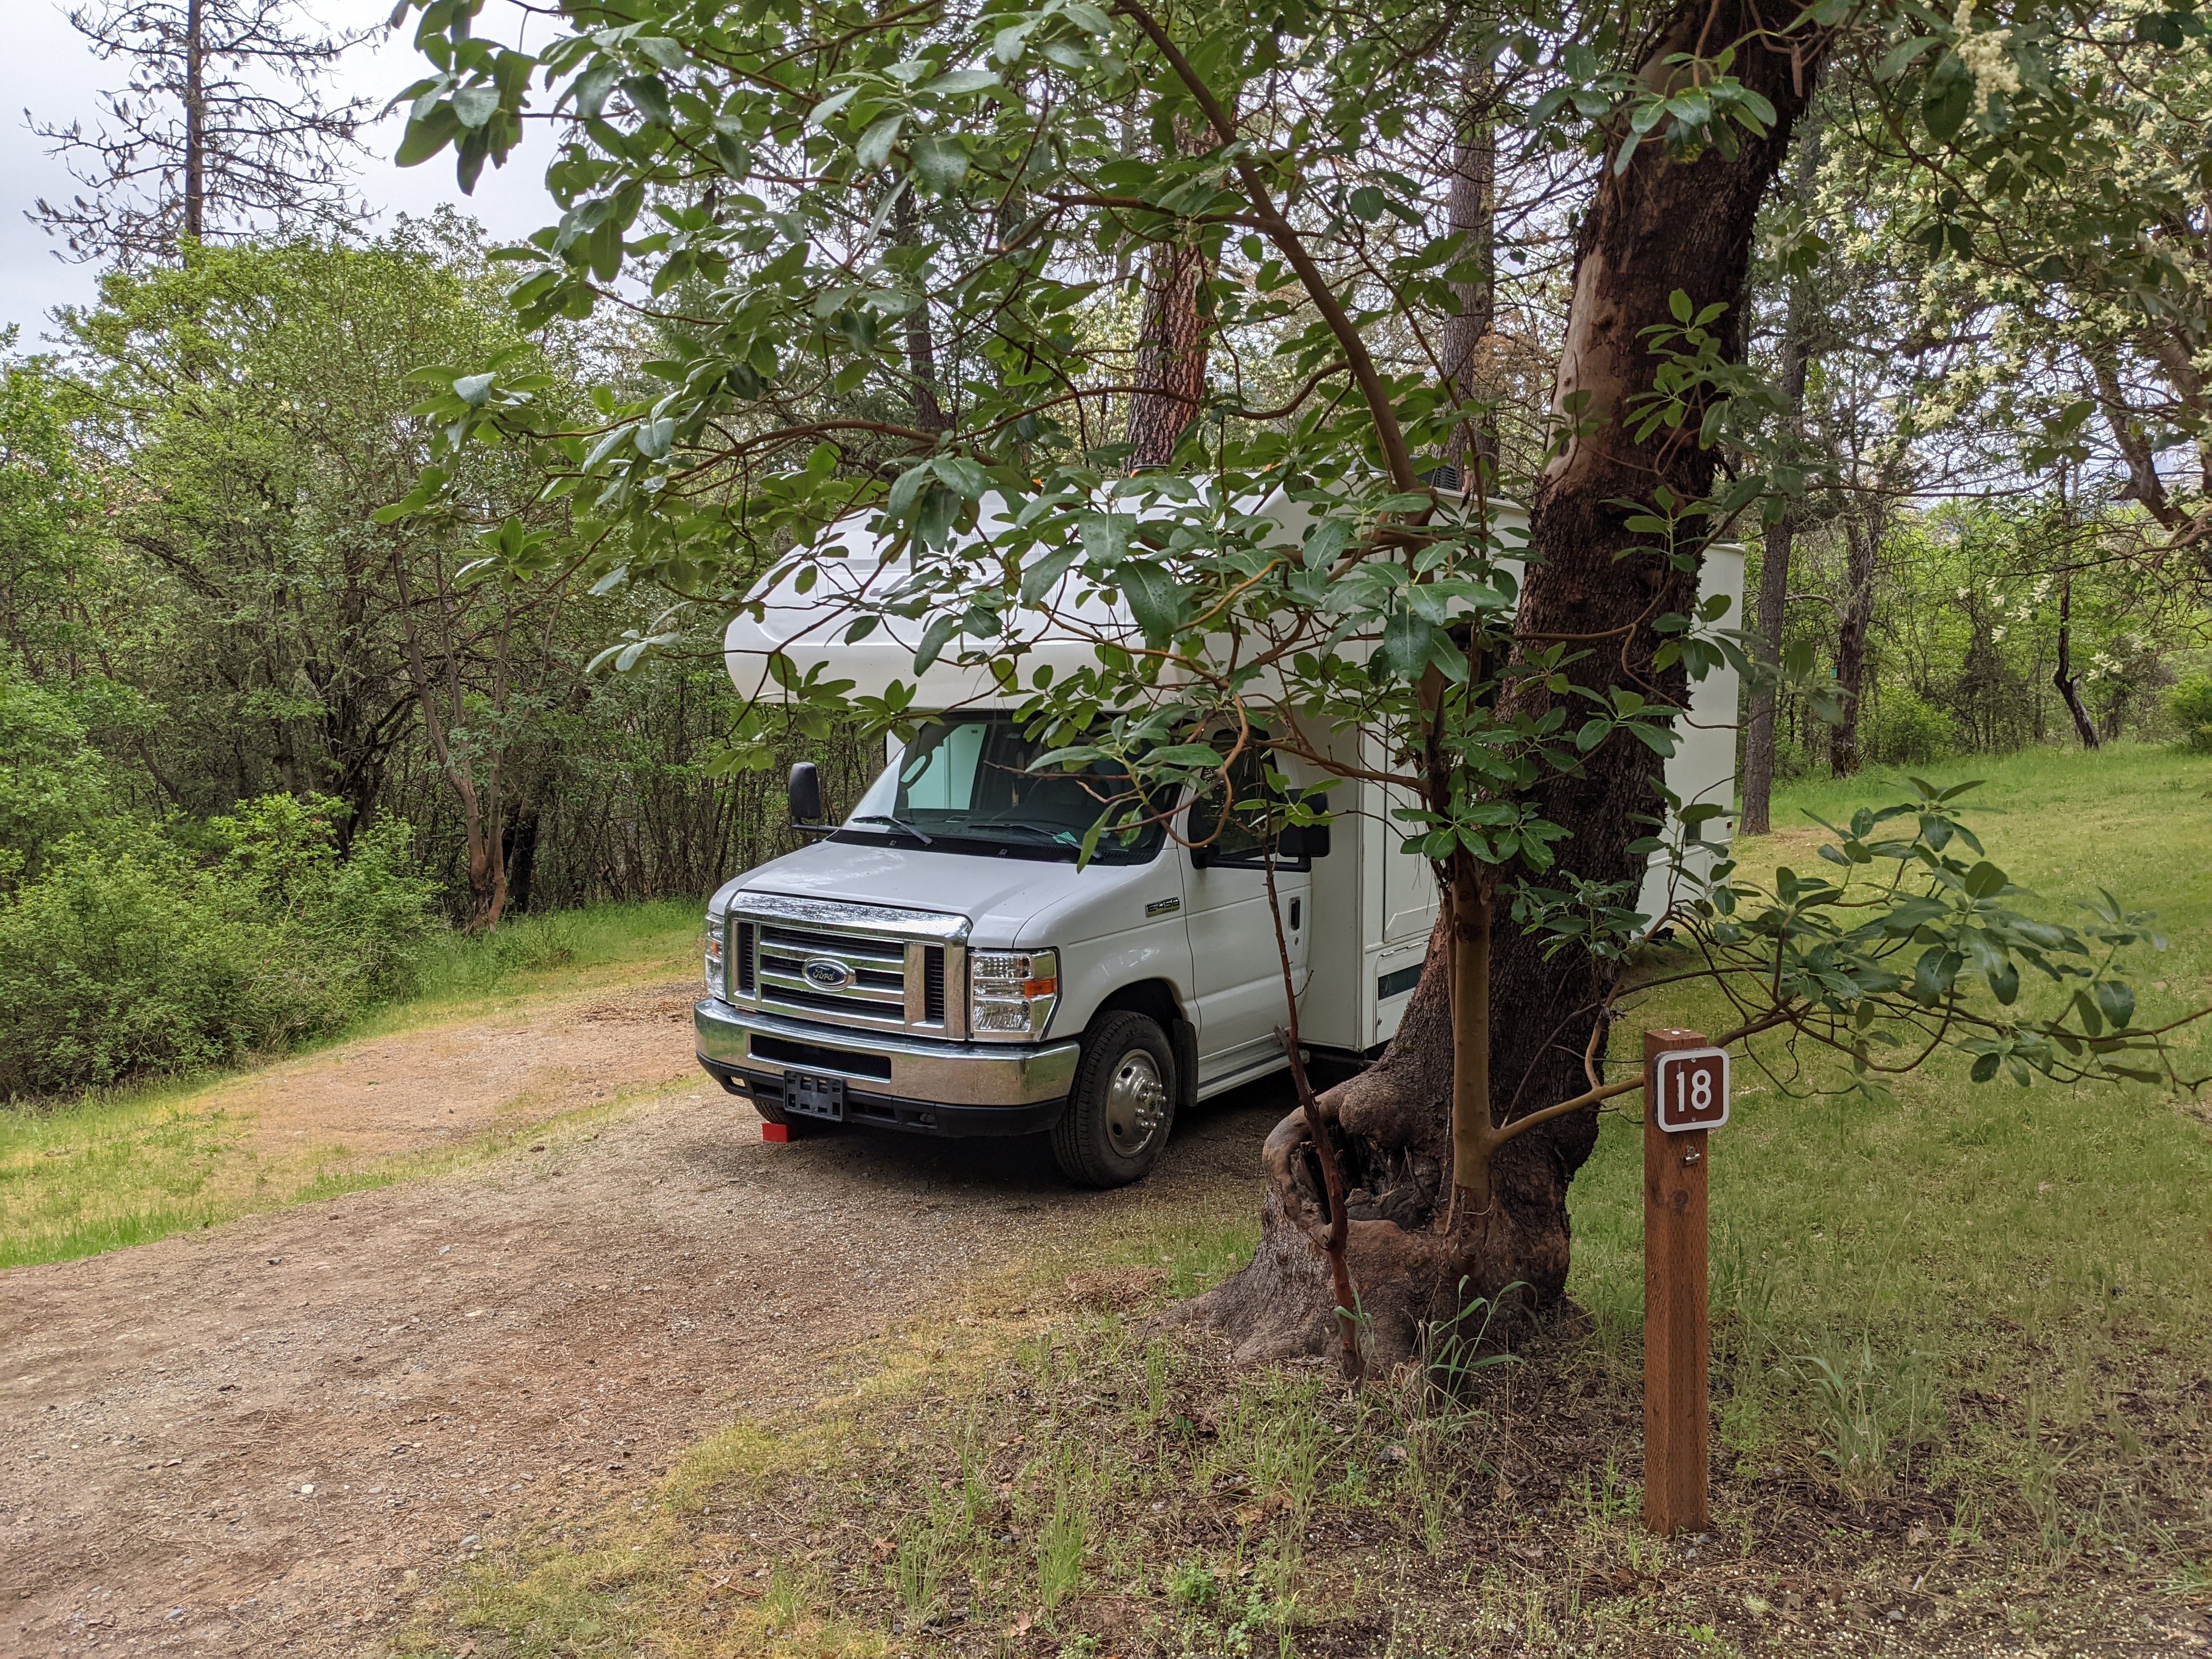 Camper submitted image from Cantrell Buckley Park - 5